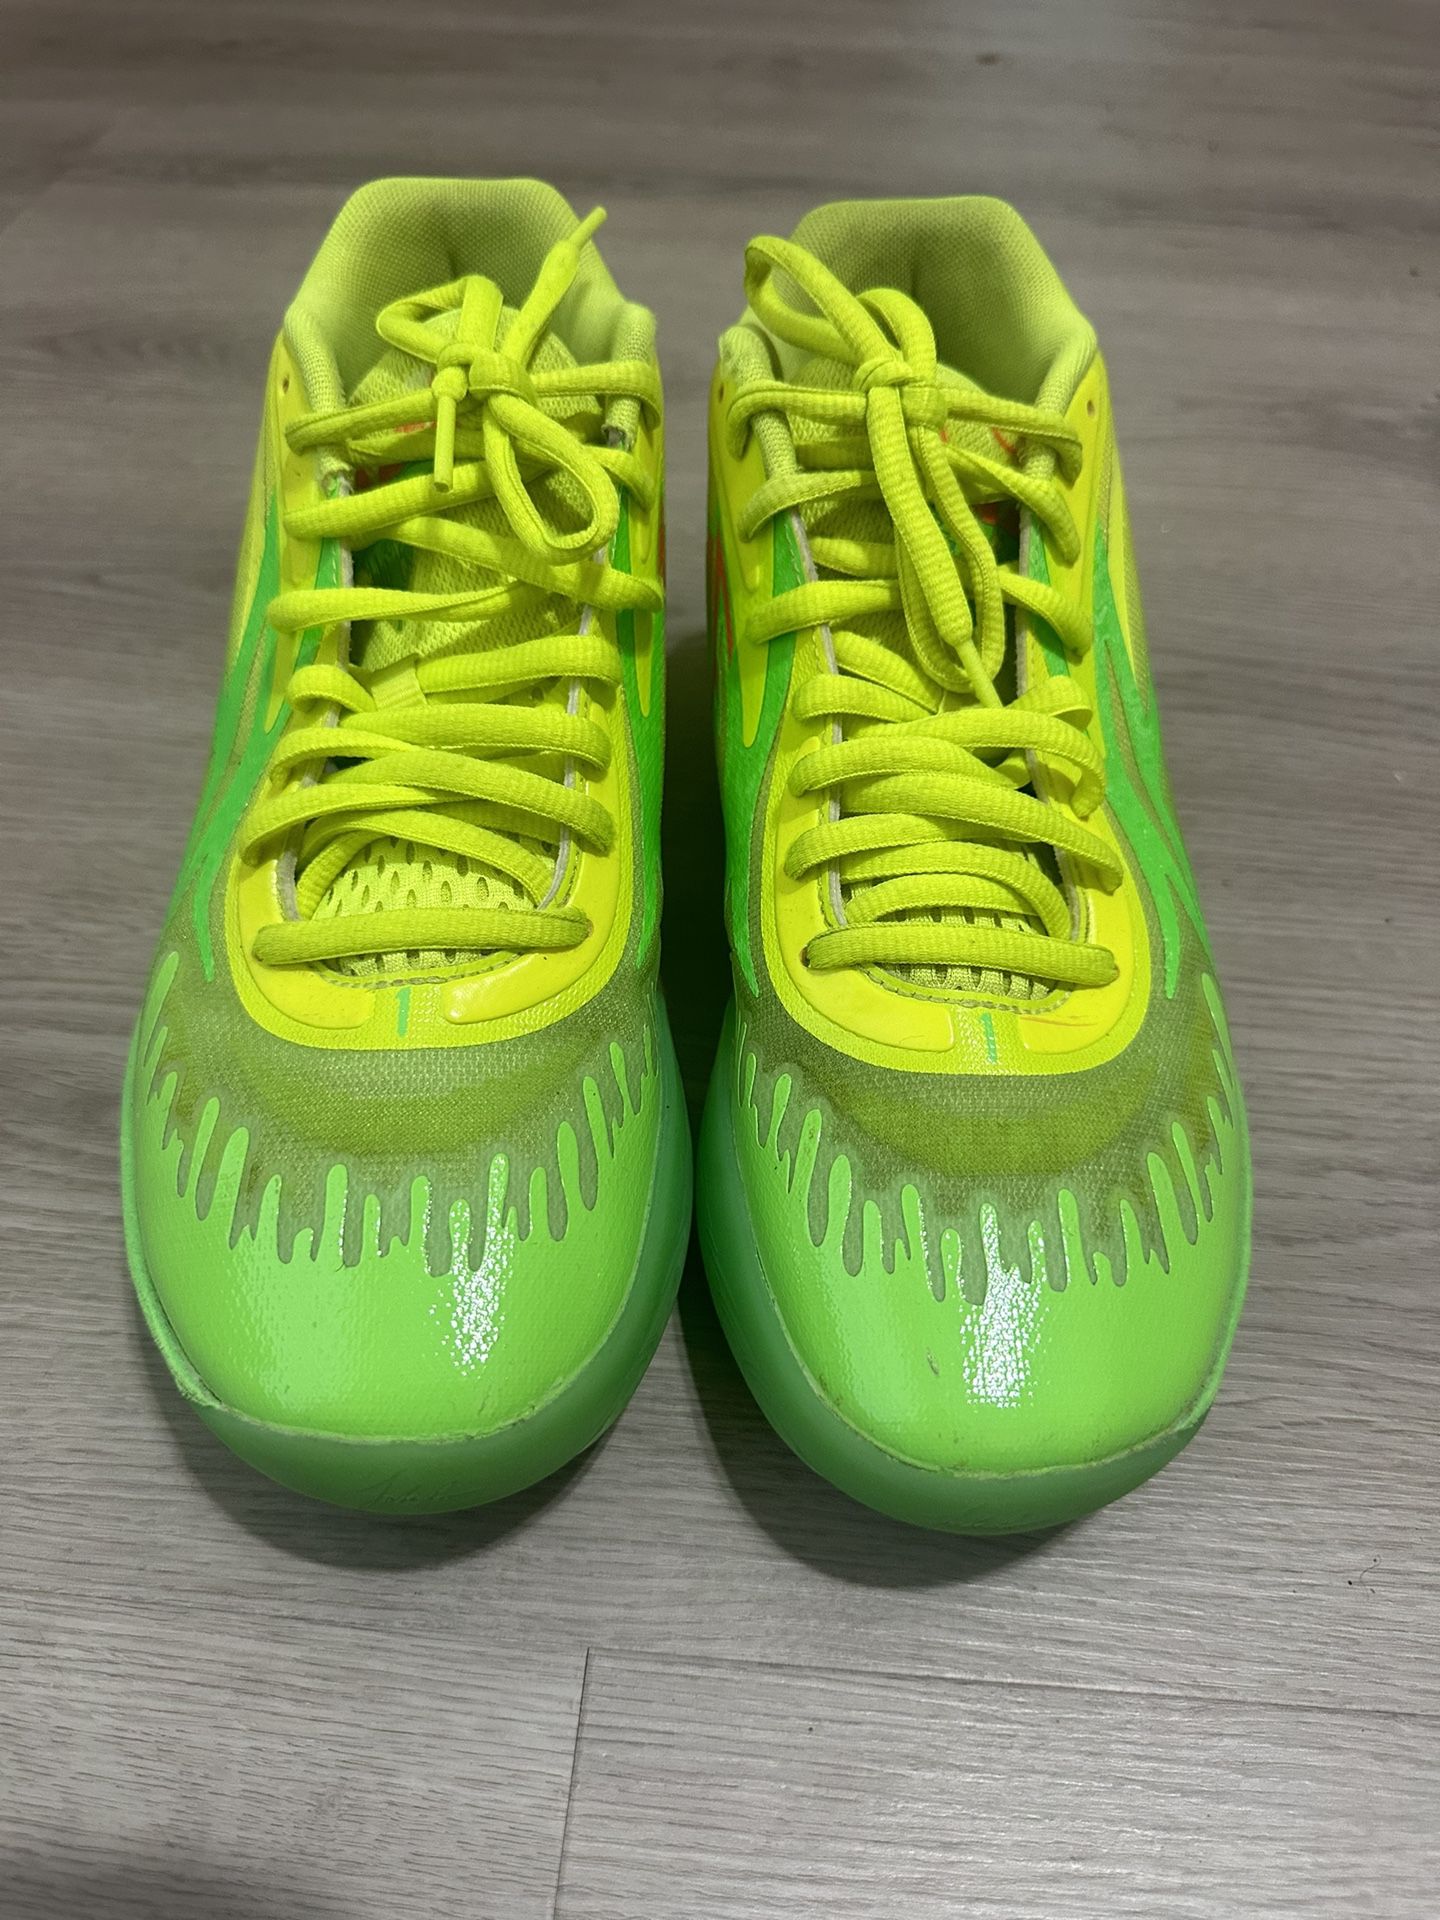 MB.02 x Nickelodeon Slime Shoes- Size 8.5